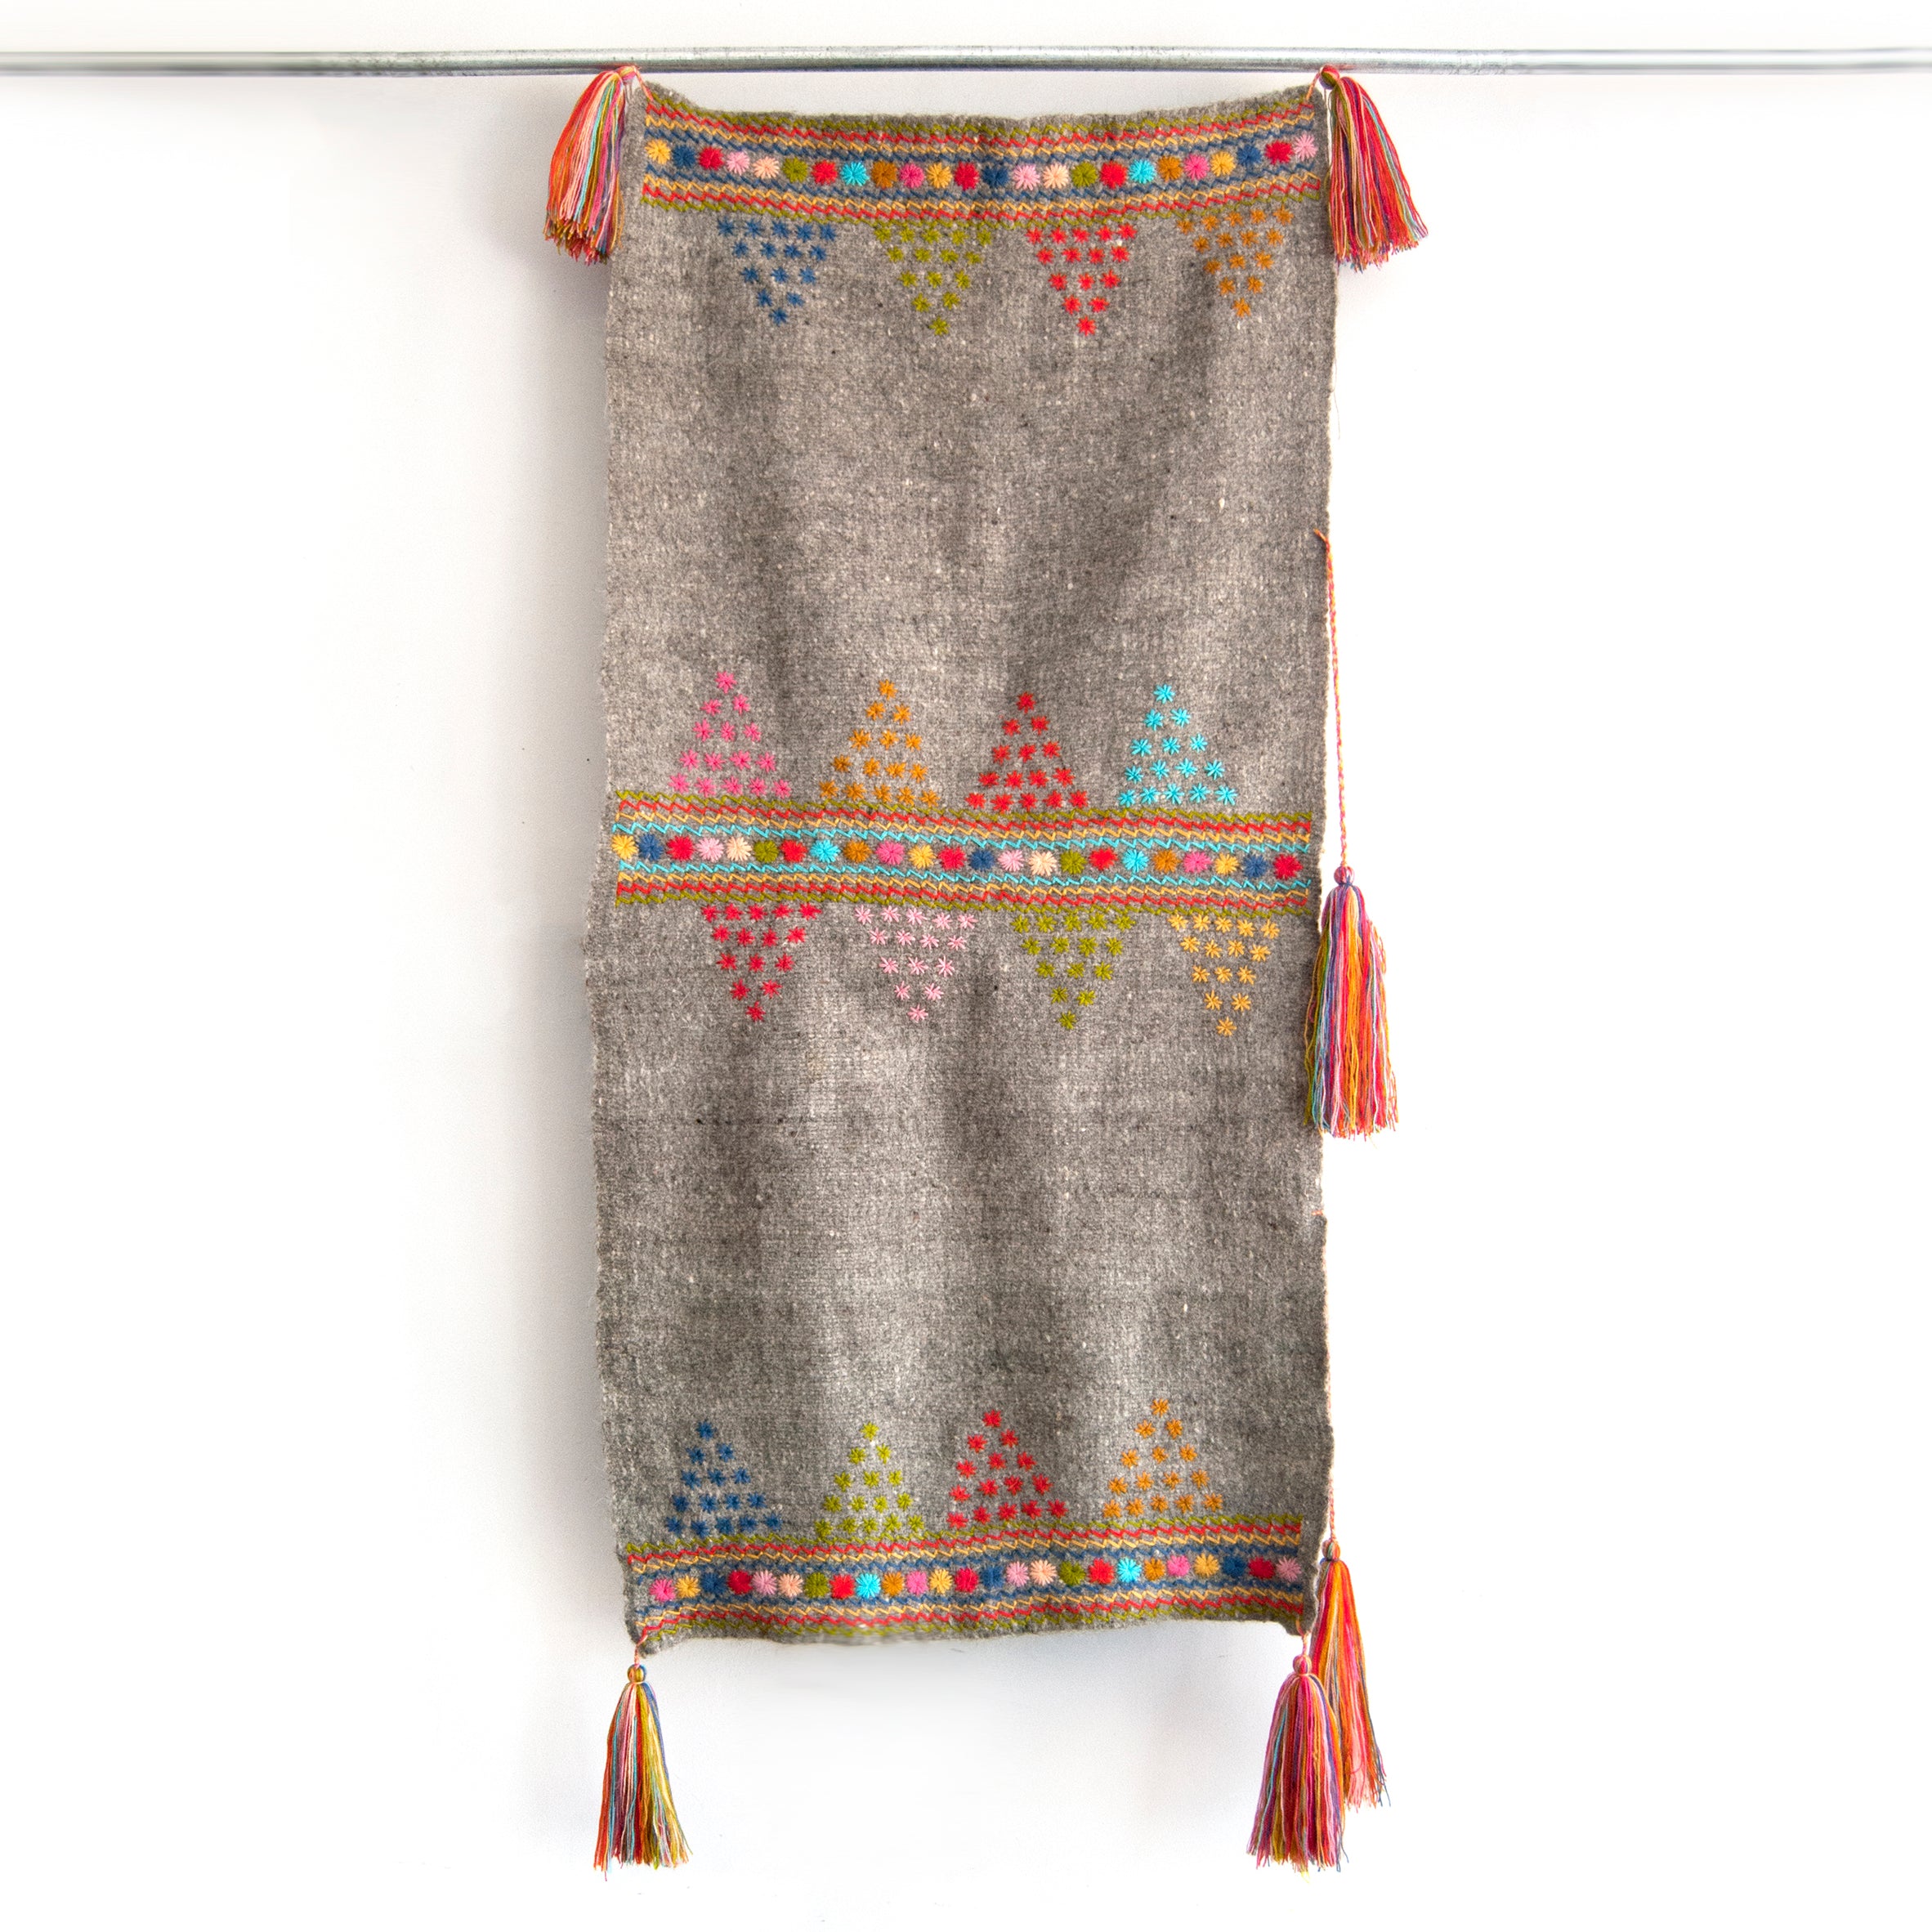 Rectangular grey wool throw with colorful embroidered trim & accents and multicolor tassels at each corner